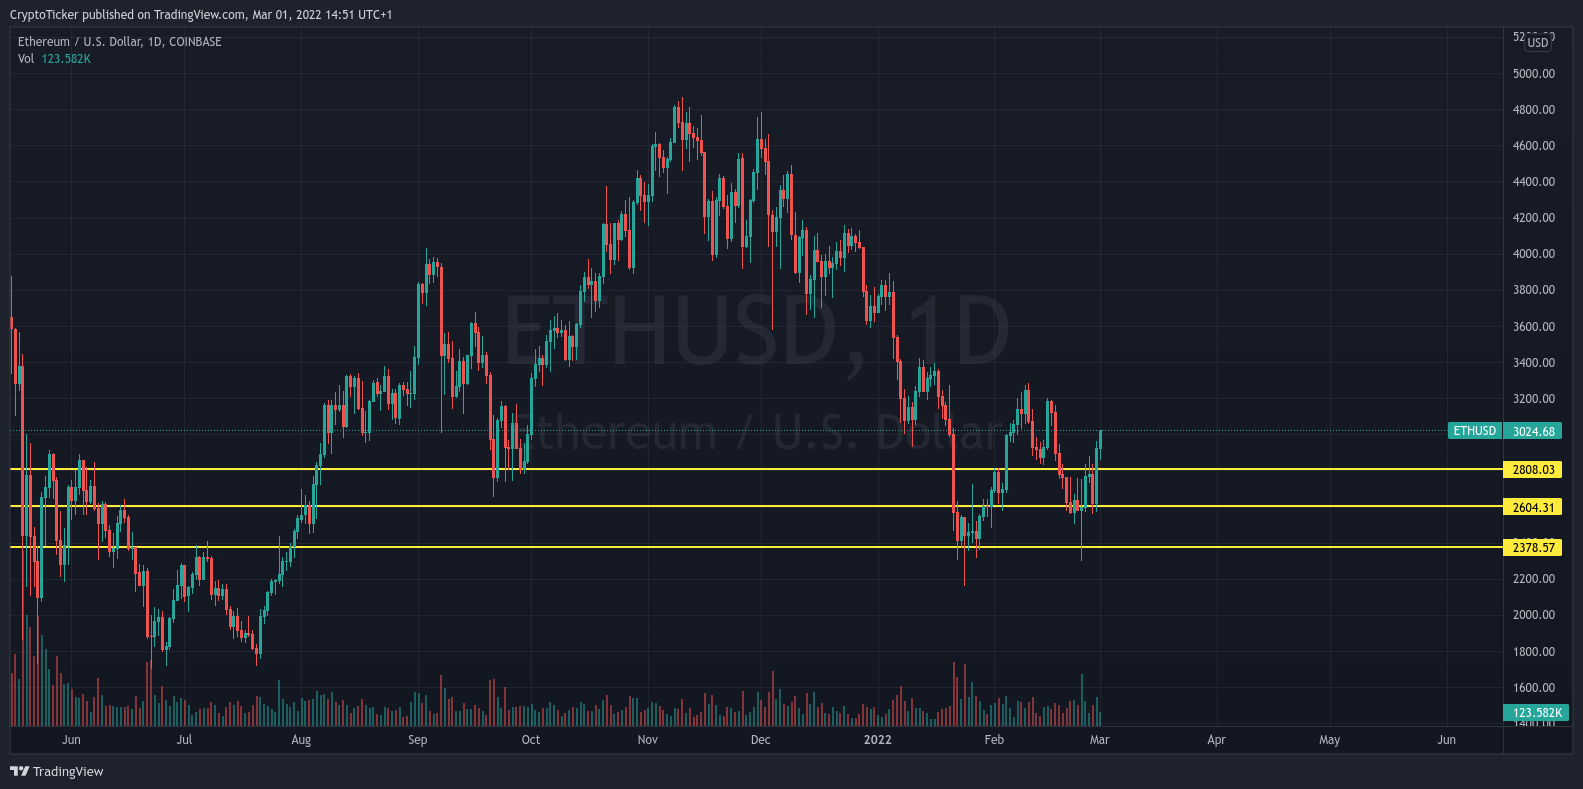 ETH/USD 1-day chart showing the important areas of ETH